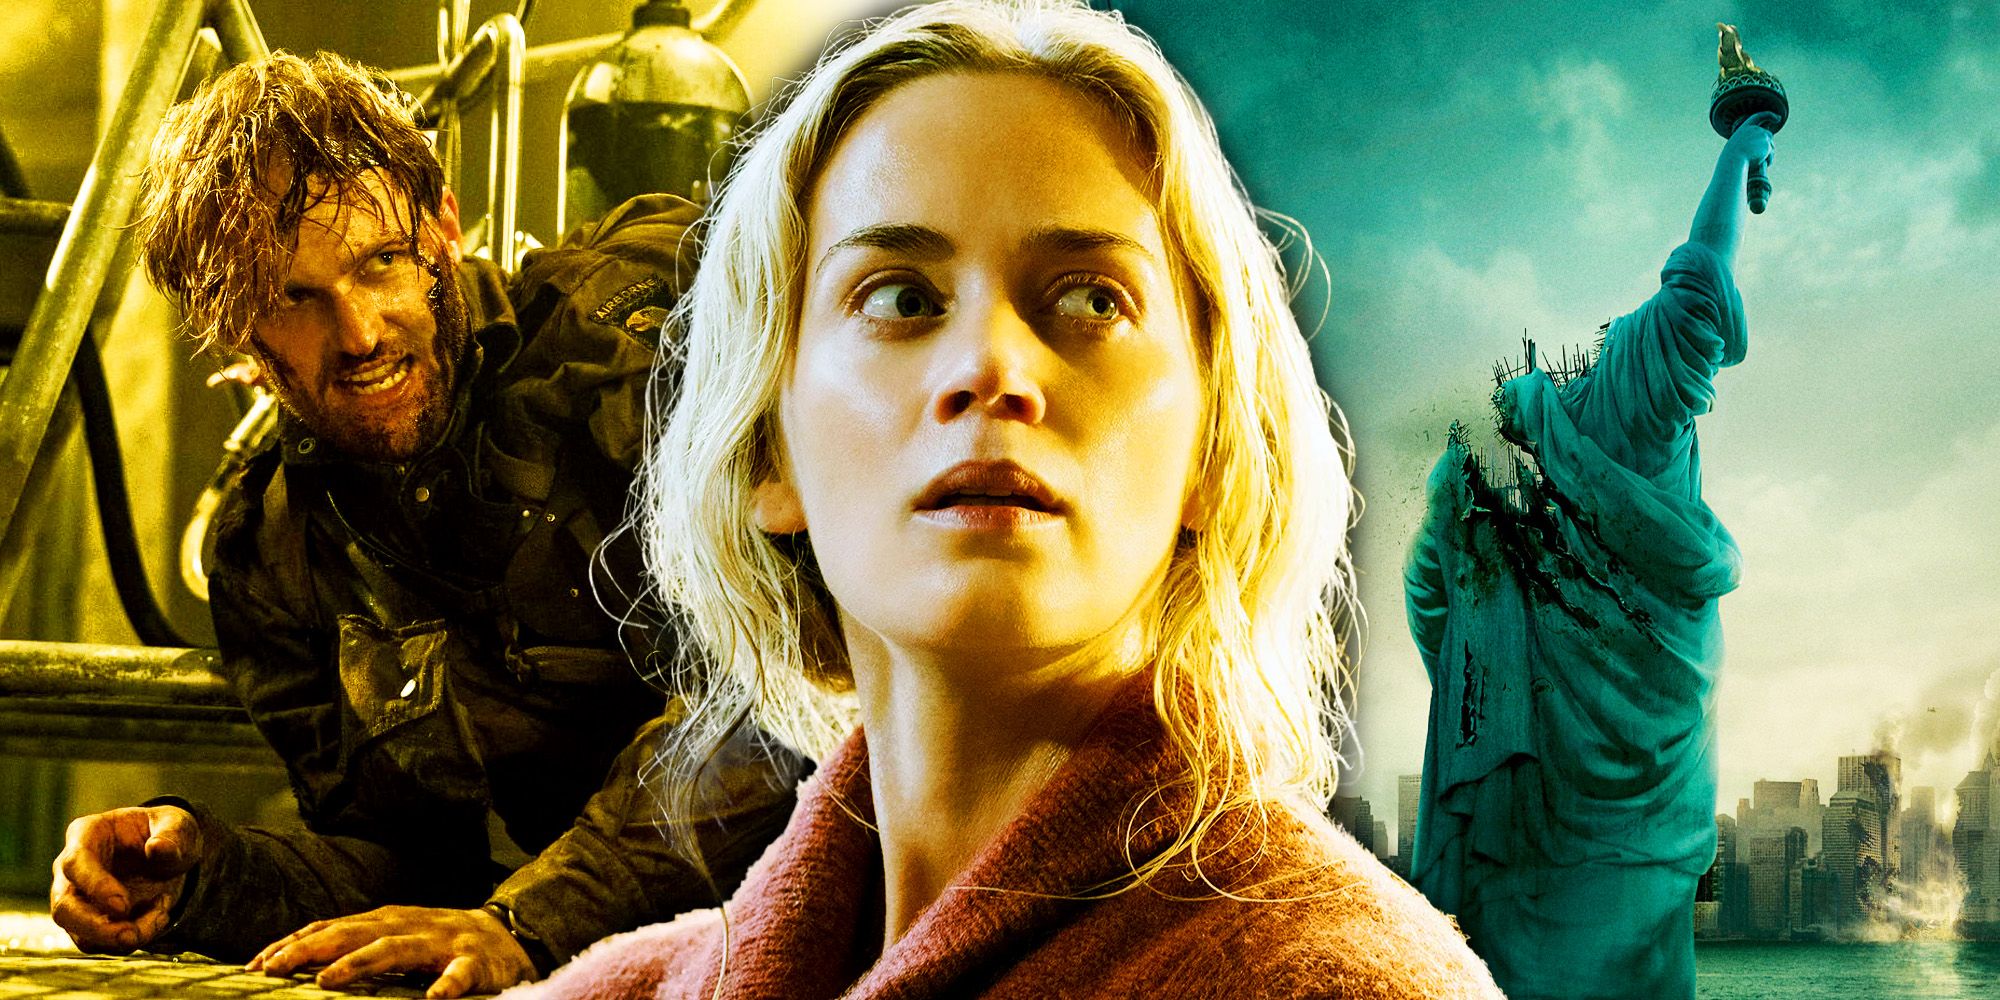 Wyatt Russell in Overlord, Emily Blunt in A Quiet Place, and the poster for Cloverfield